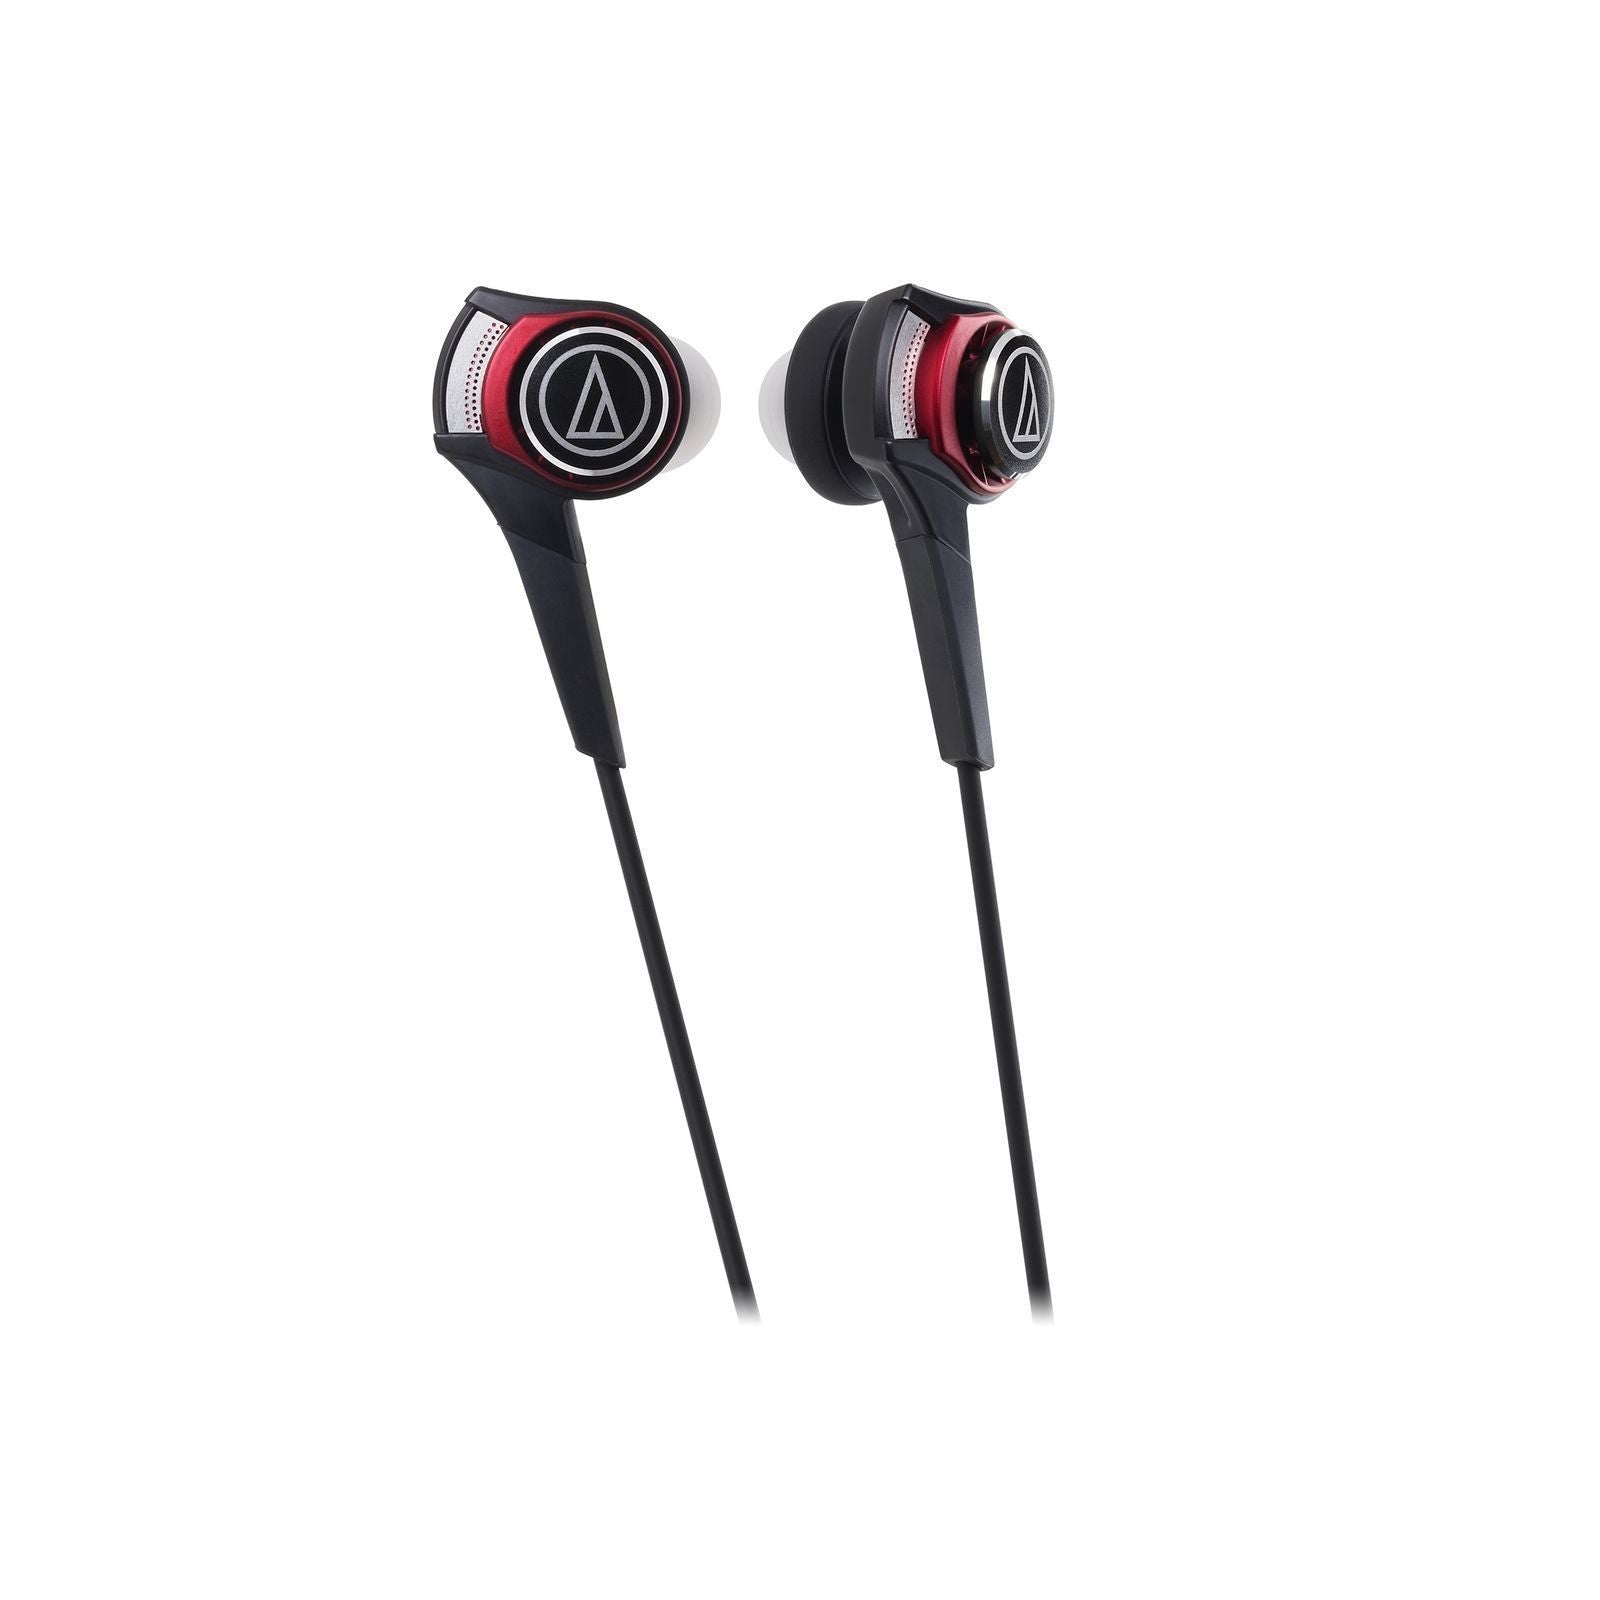 Audio-Technica ATH-CKS990iS Solid Bass In-Ear Headphones with In-line Mic & Control